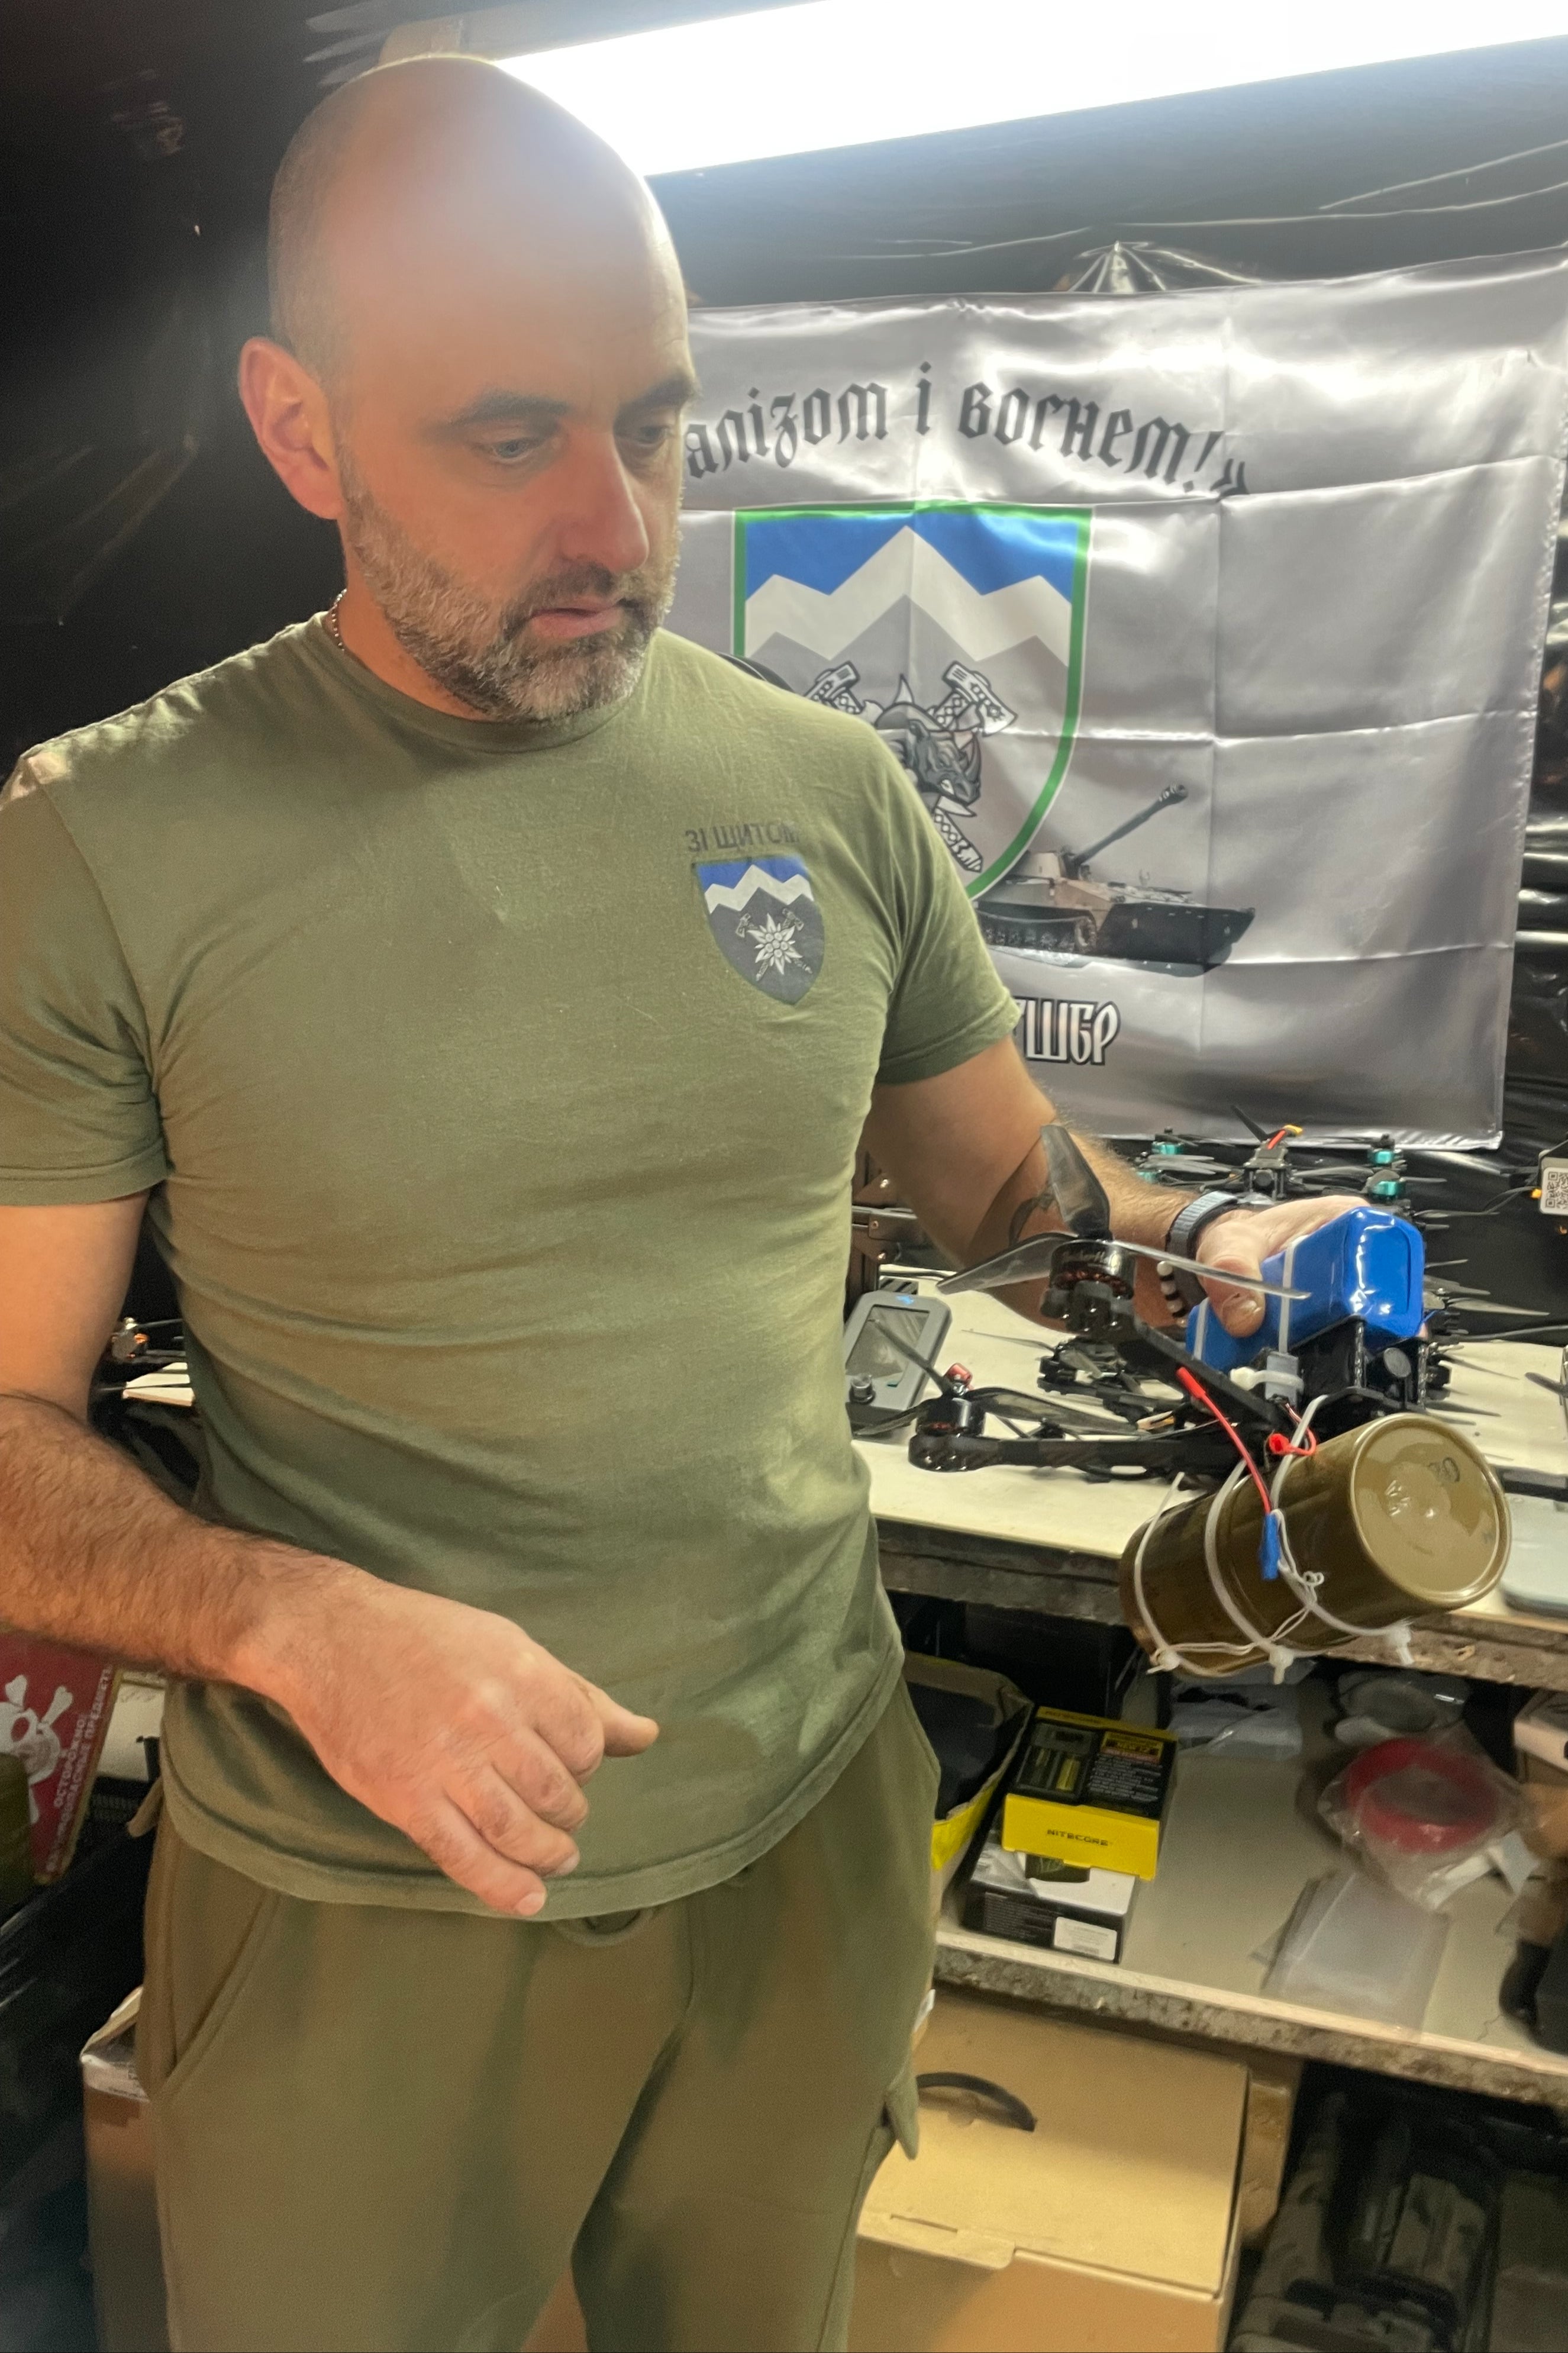 ‘Curly’ attaching a bomb to a drone